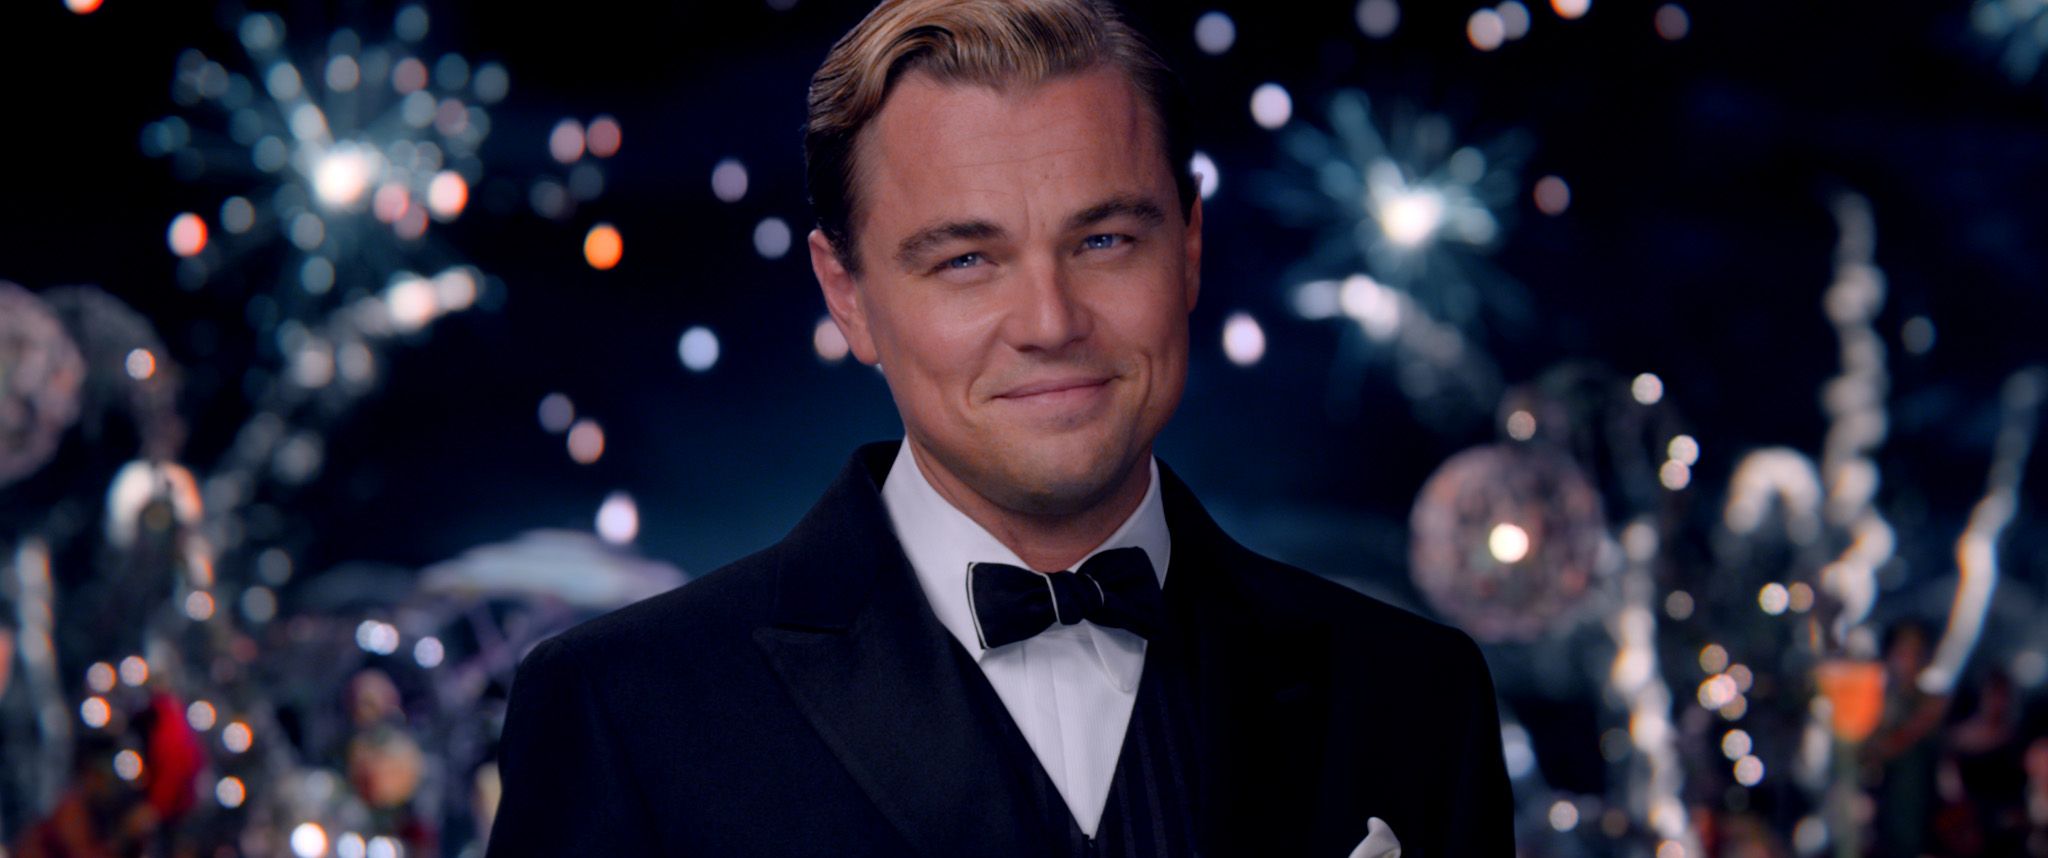 THE GREAT GATSBY Review. THE GREAT GATSBY Stars Leonardo DiCaprio and